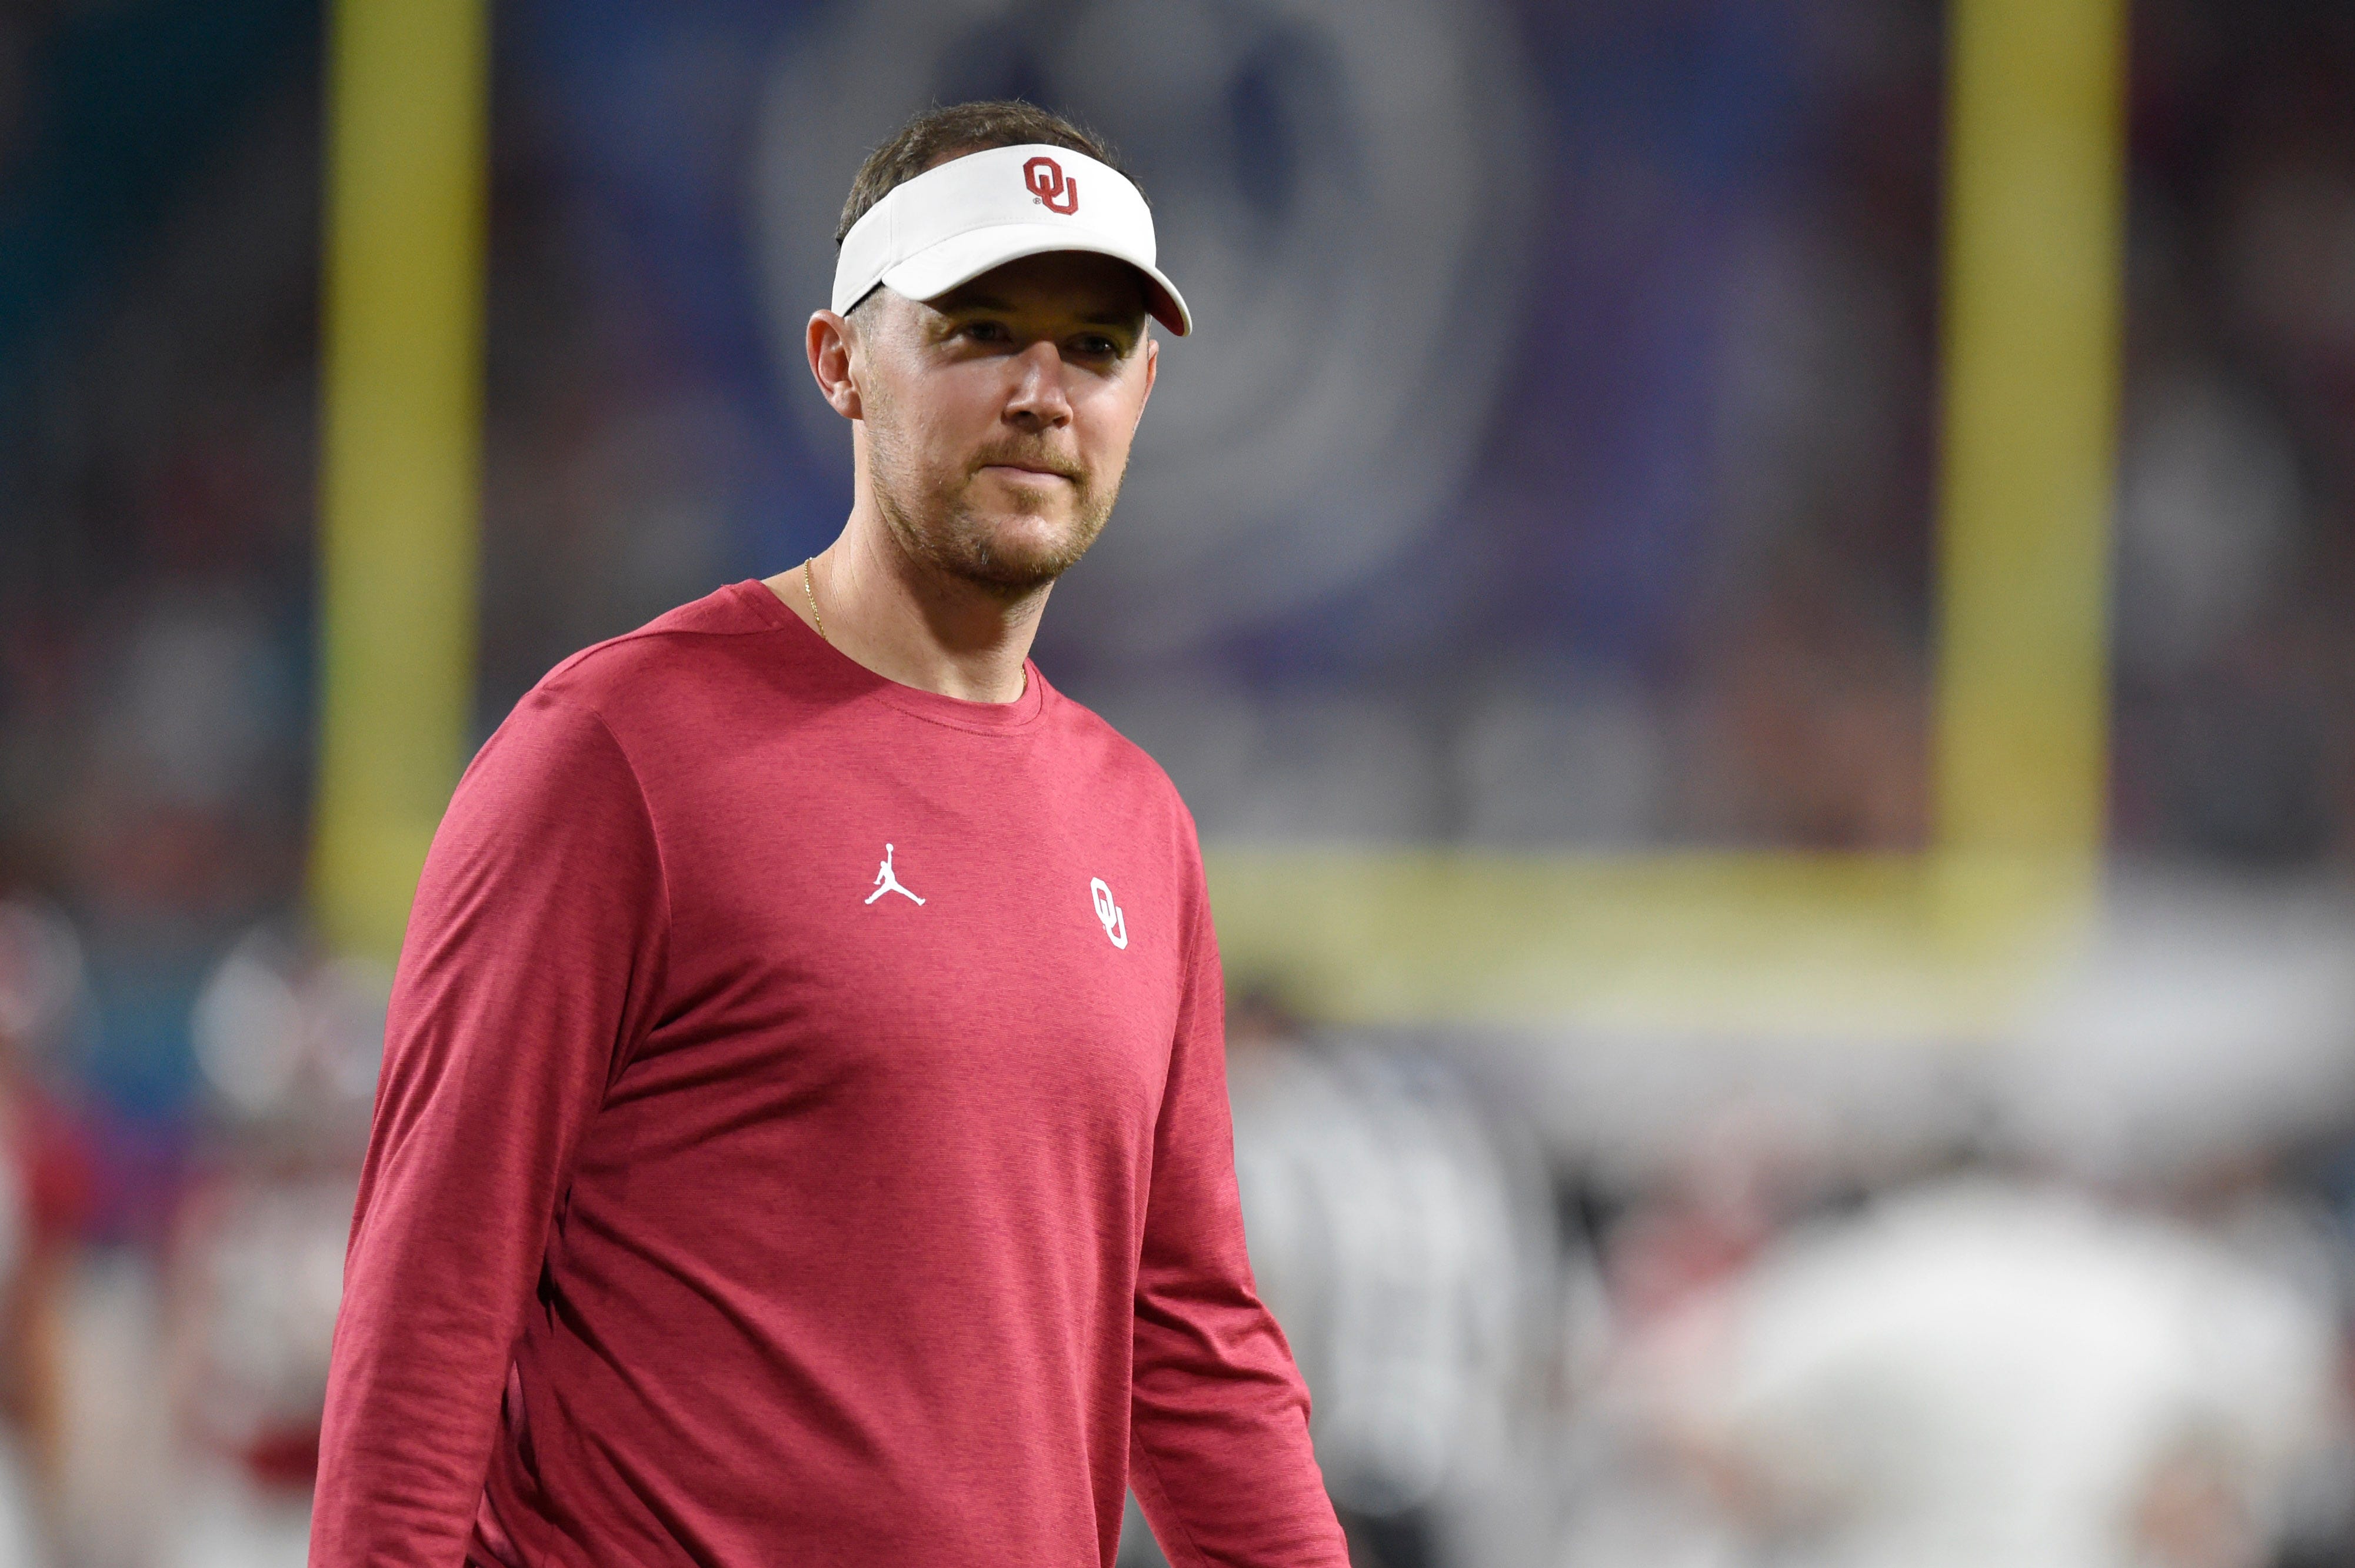 Oklahoma, Sooners coach Lincoln Riley agree to contract extension